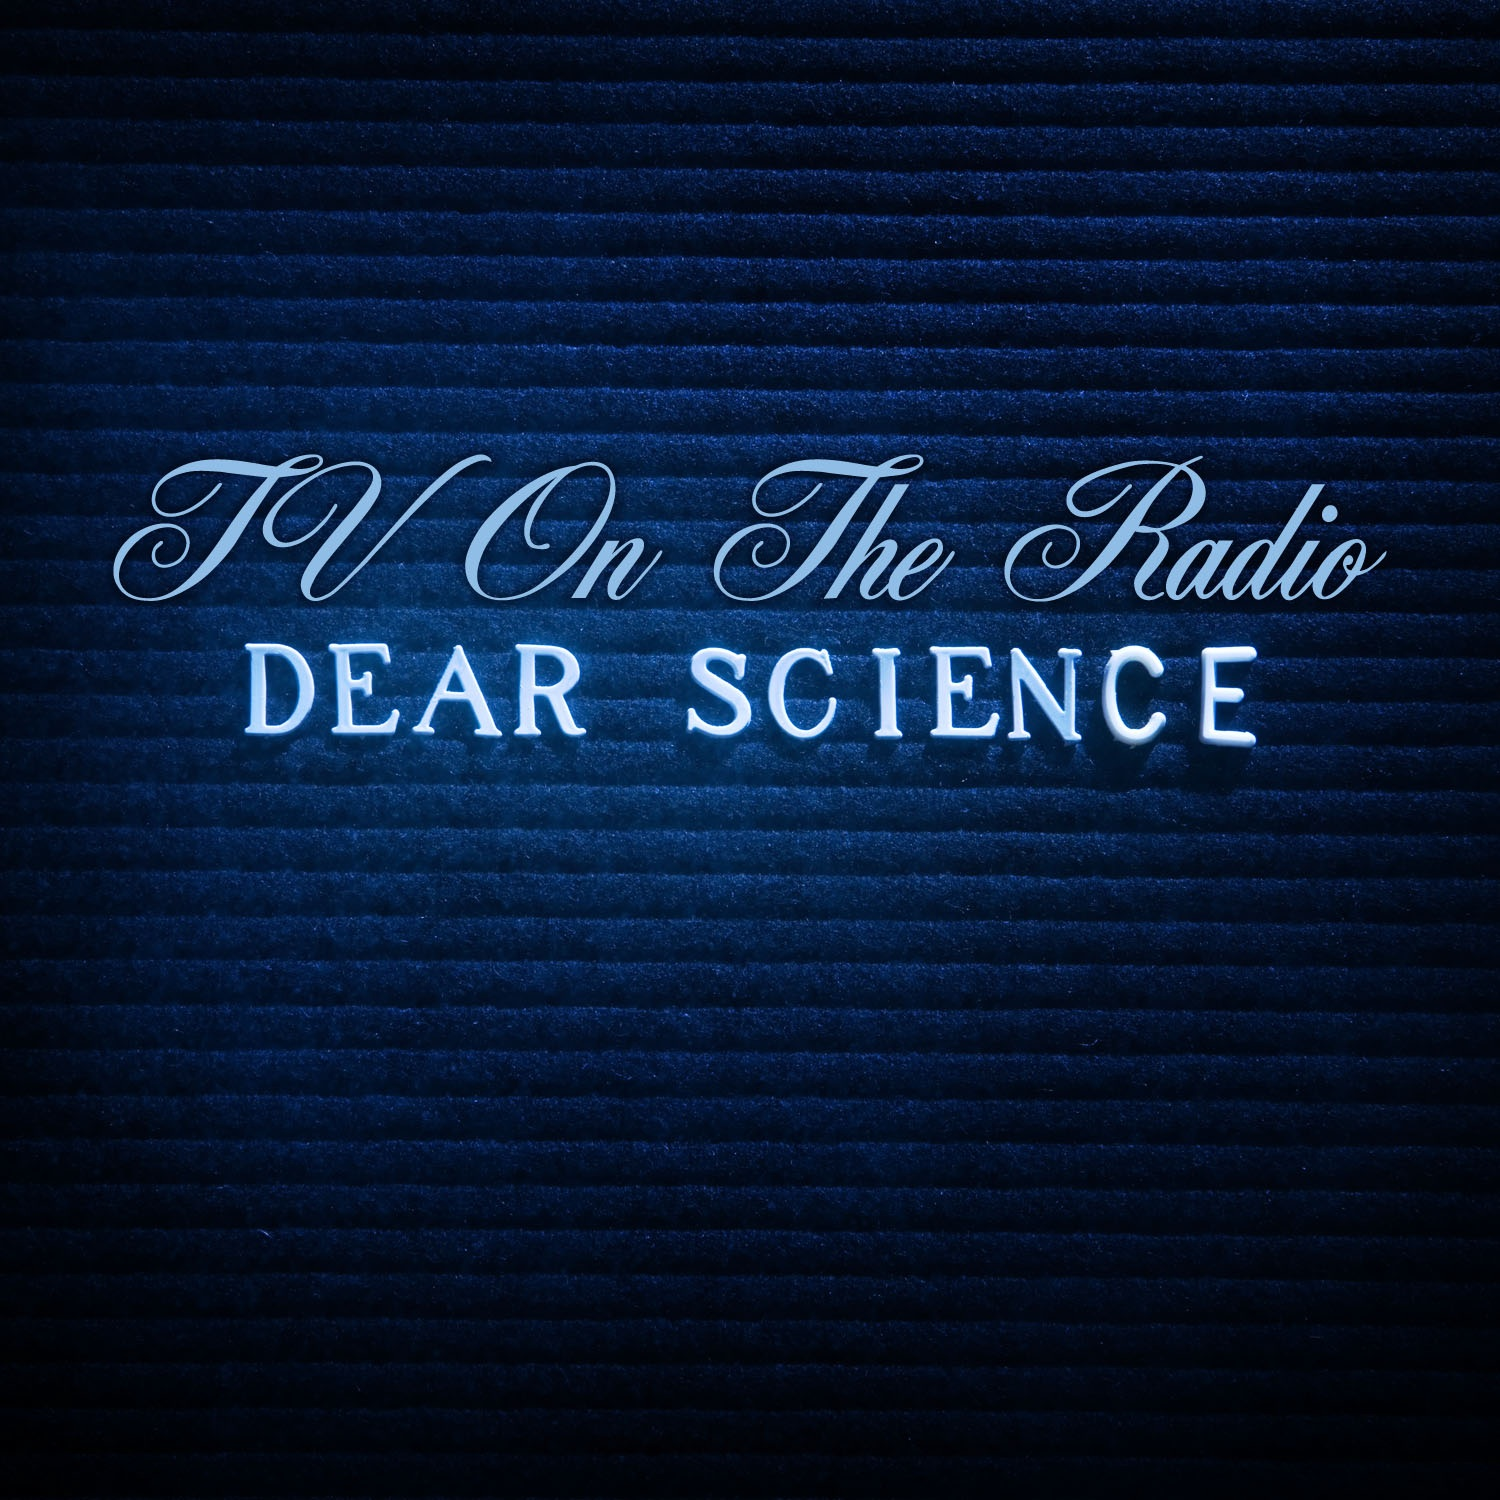 TV On The Radio - Dear Science (2008) FLAC Download